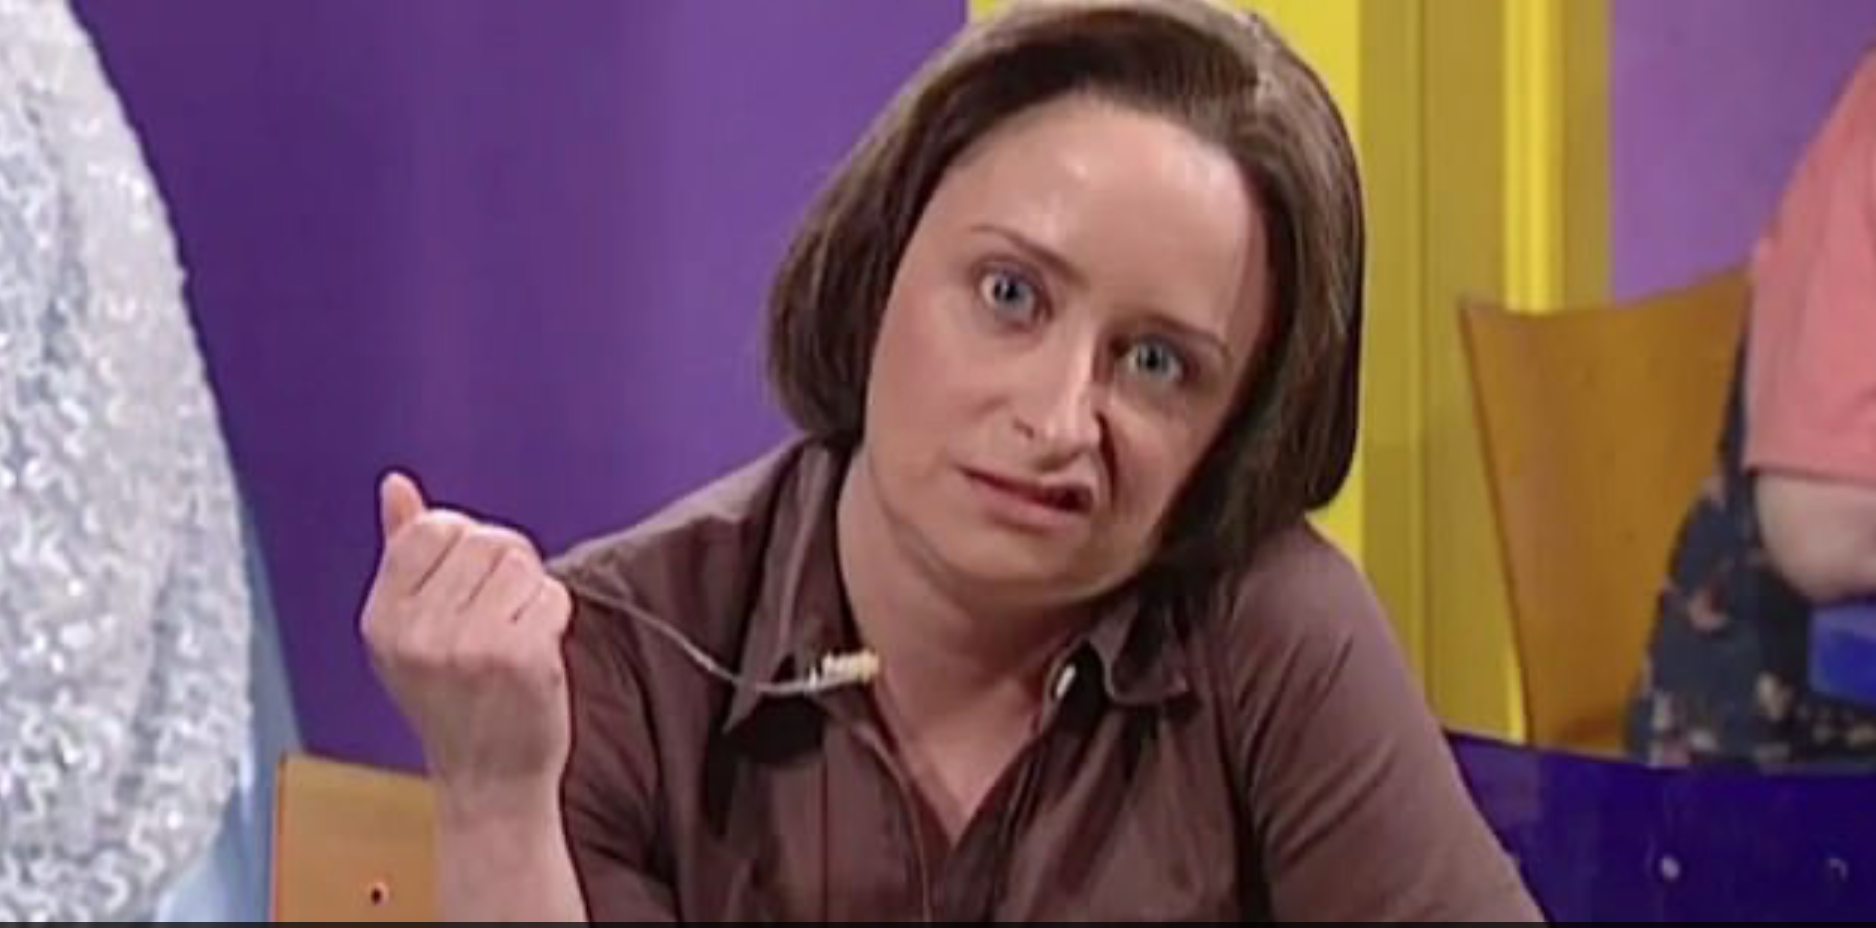 Debbie Downer, played by Rachel Dratch, is a recurring character on SNL